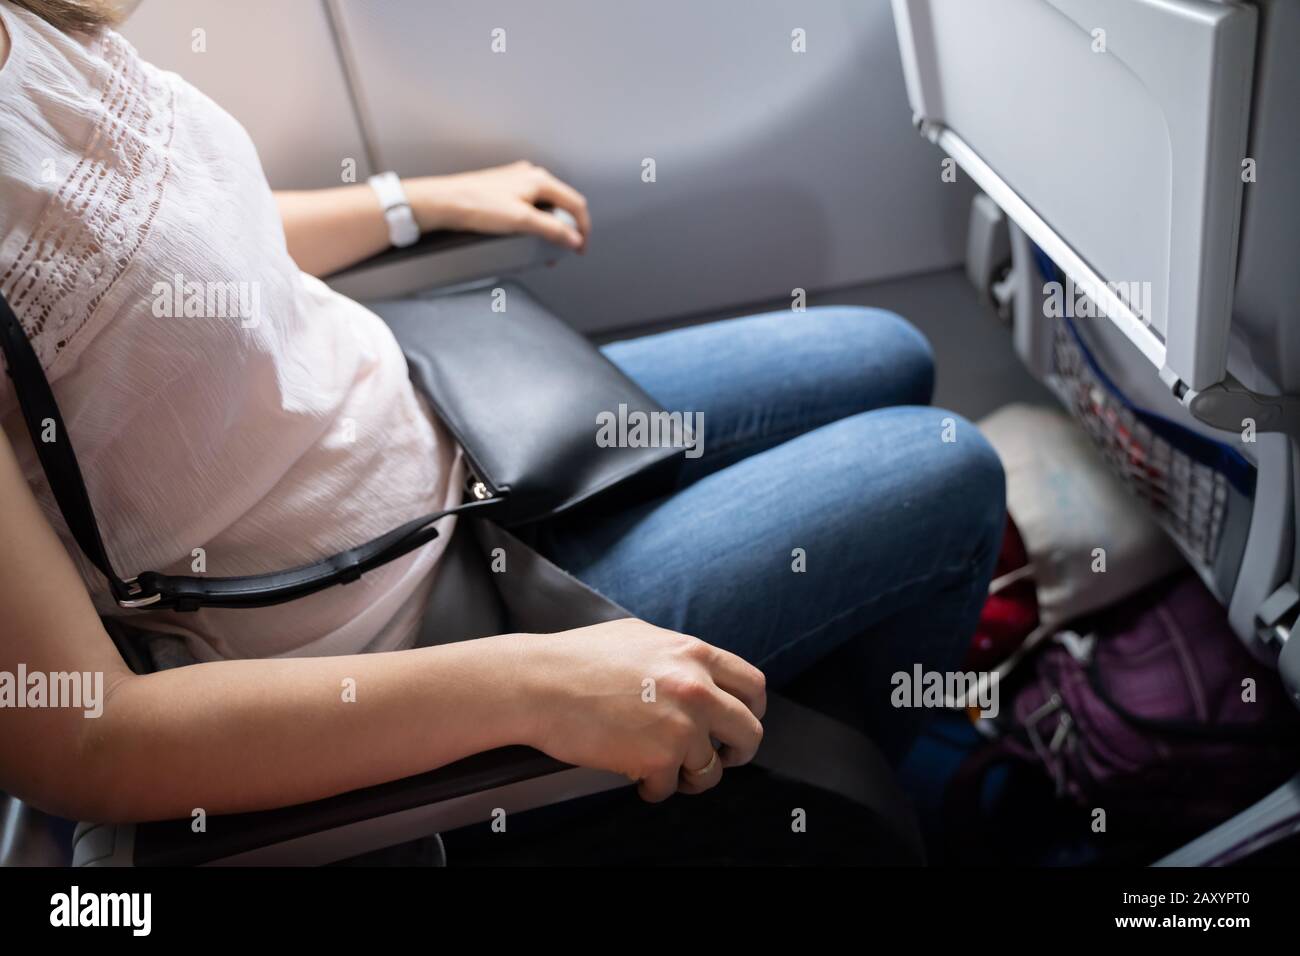 Nervous Woman Holding Armrests Tight In Airplane Stock Photo